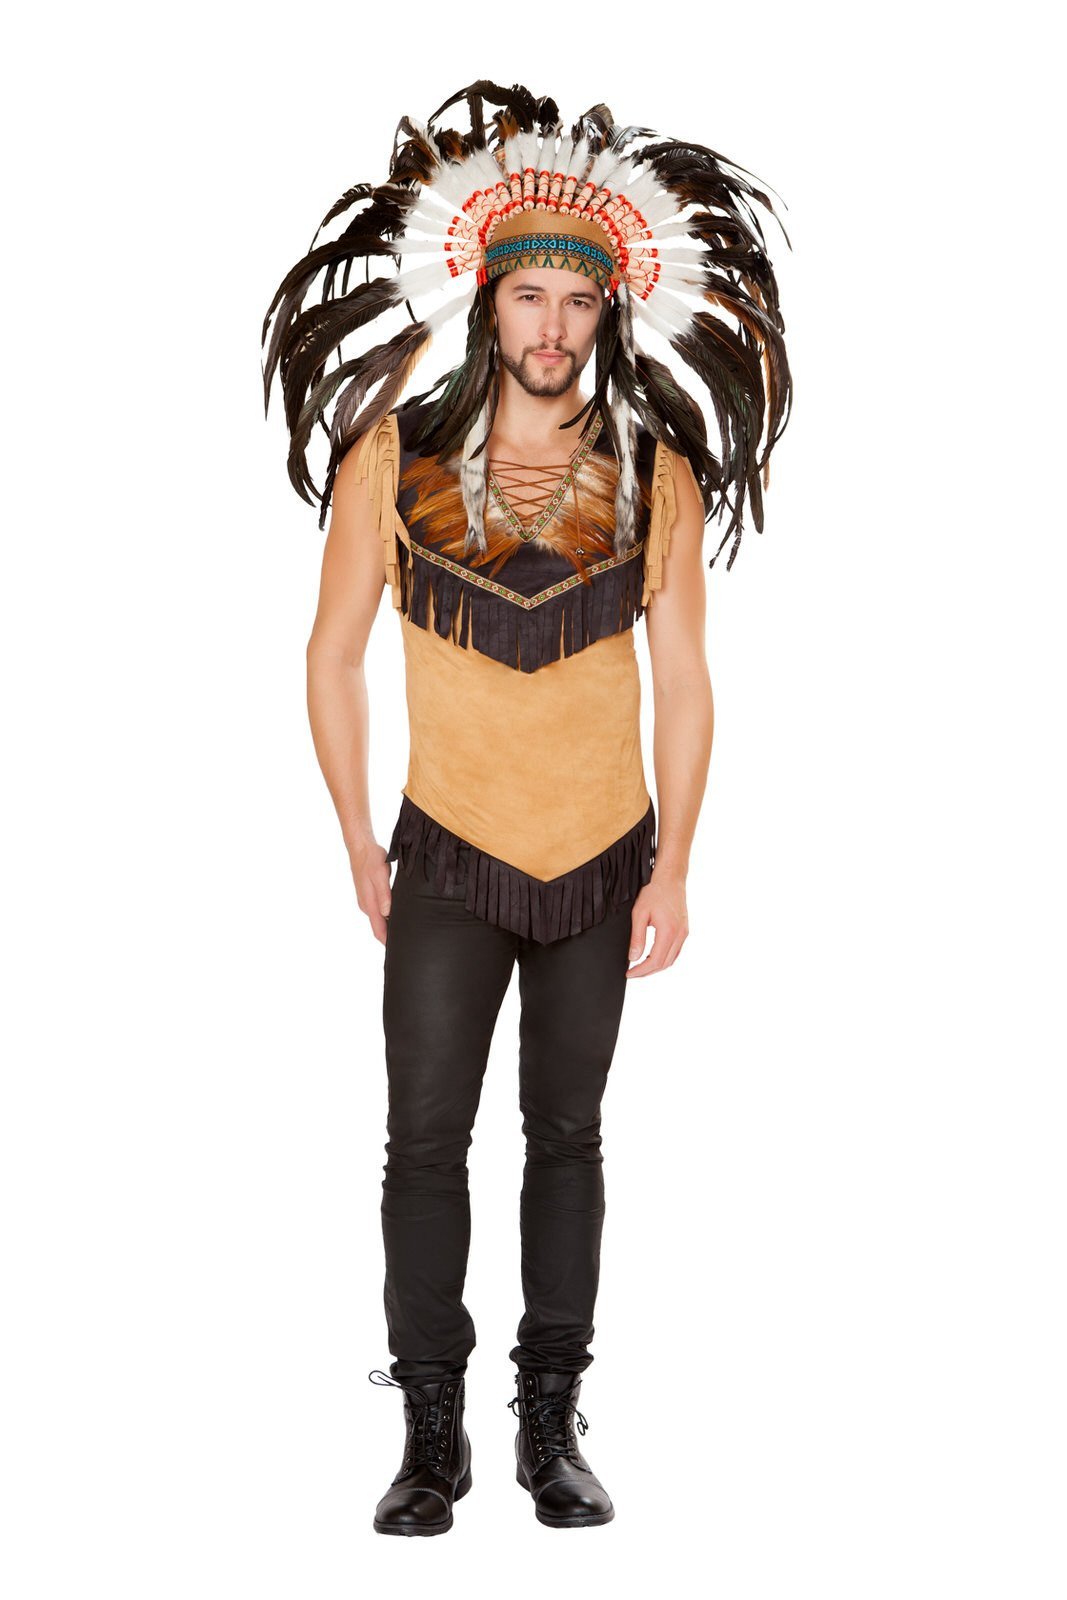 Buy 1pc Men’s Native Indian from RomaRetailShop for 44.99 with Same Day Shipping Designed by Roma Costume 4797-AS-S